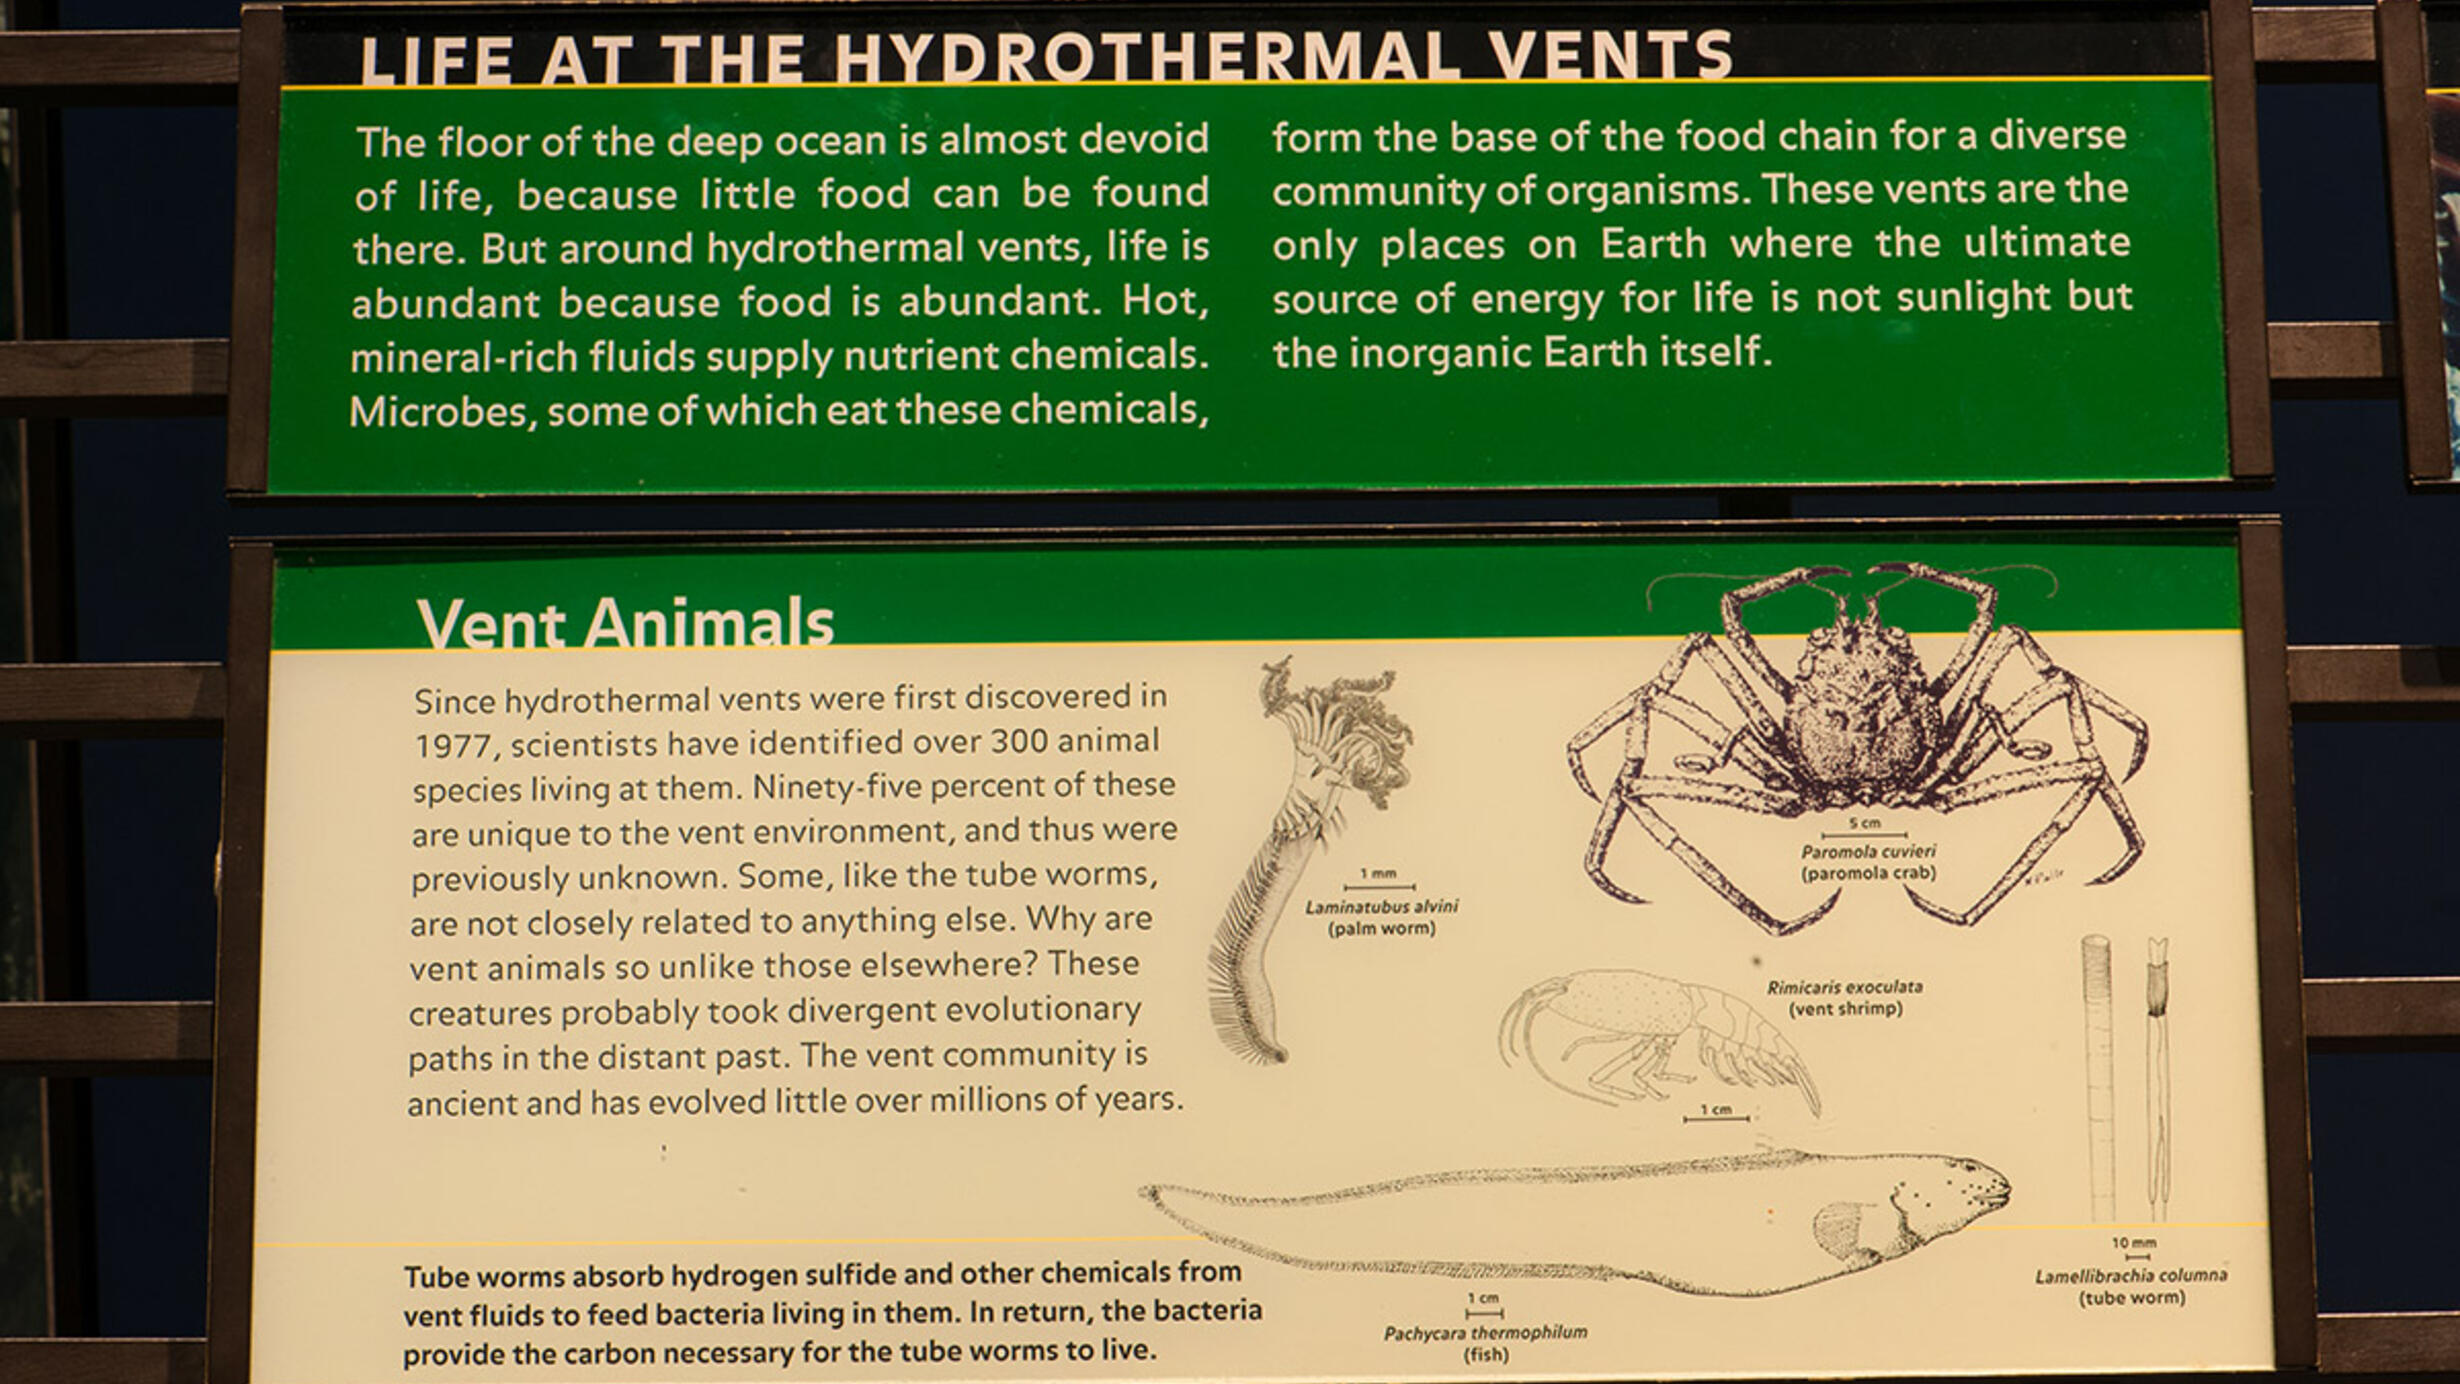 Life at the hydrothermal vents